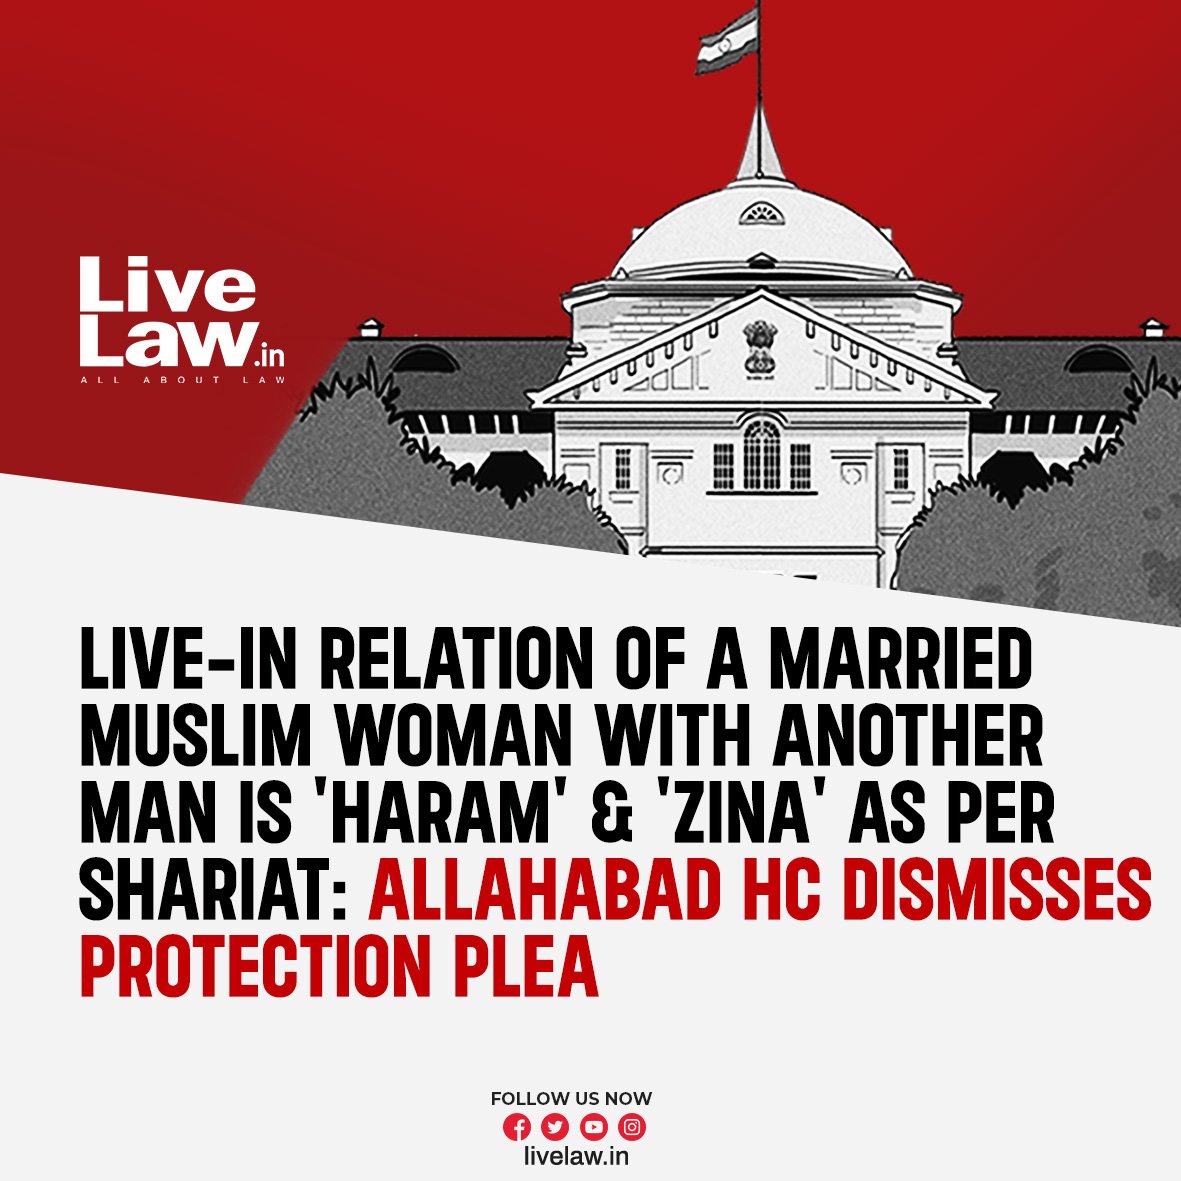 The Allahabad High Court dismisses a married Muslim woman's protection plea who was in a live-in relationship with a Hindu man

#HighCourt 
#LiveInRelationship
#Shariah 
#marriage 

Picture courtesy - @LiveLawIndia